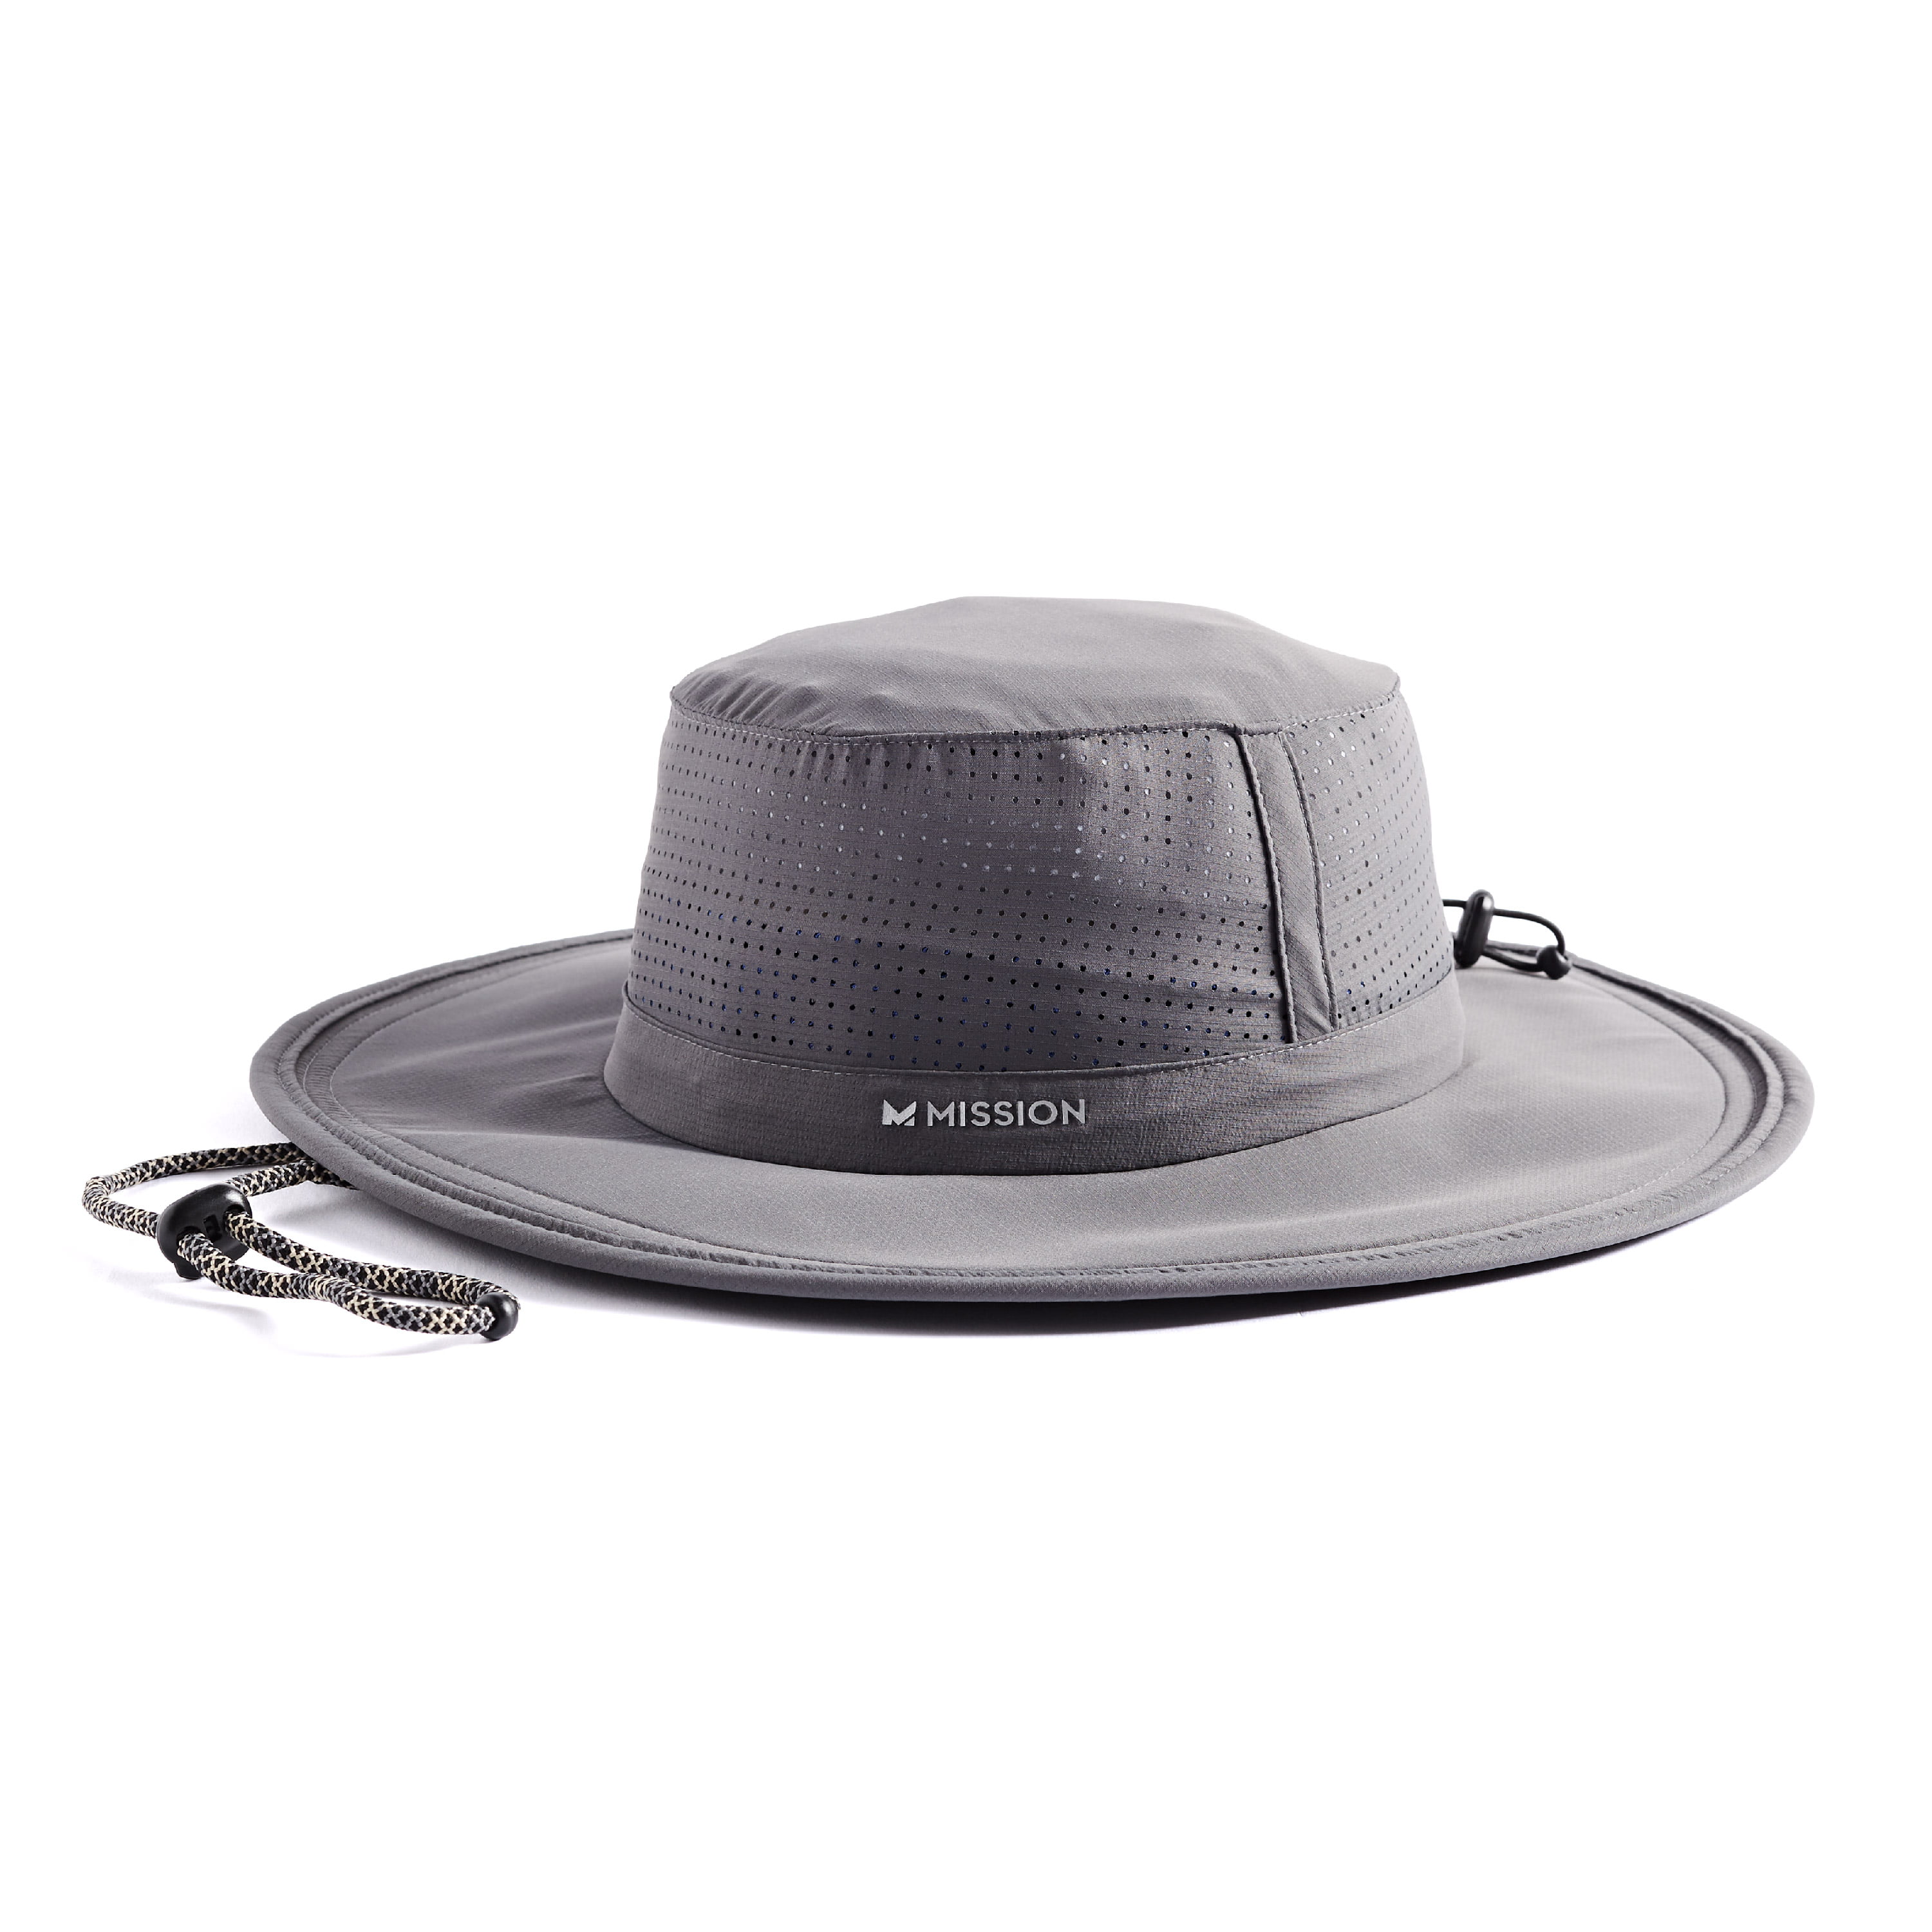 Sun Protection Floppy Sun Beach Hat Broad Brimmed A070 Collapsible UPF 50 